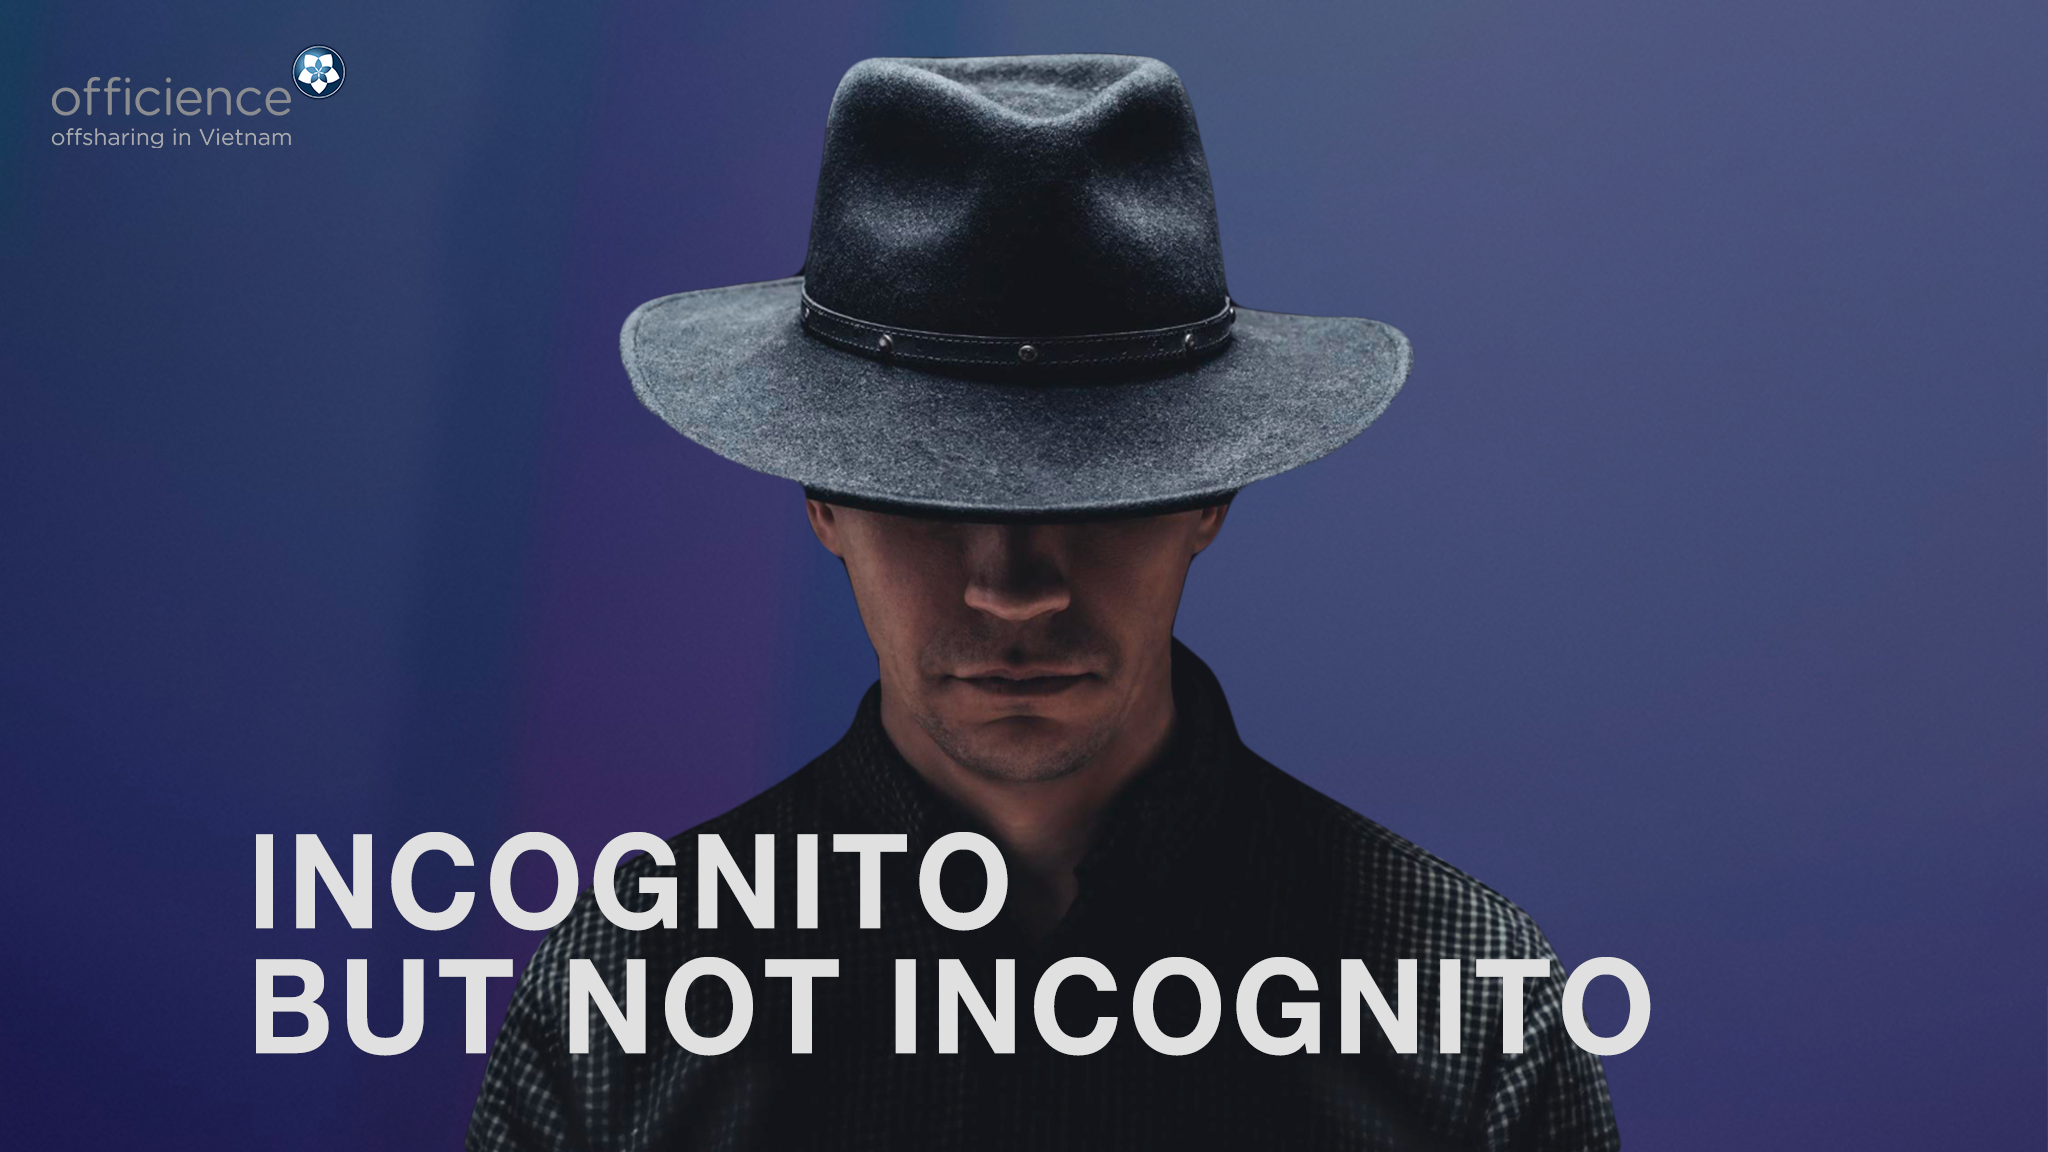 INCOGNITO TAB BUT NOT REALLY INCOGNITO?